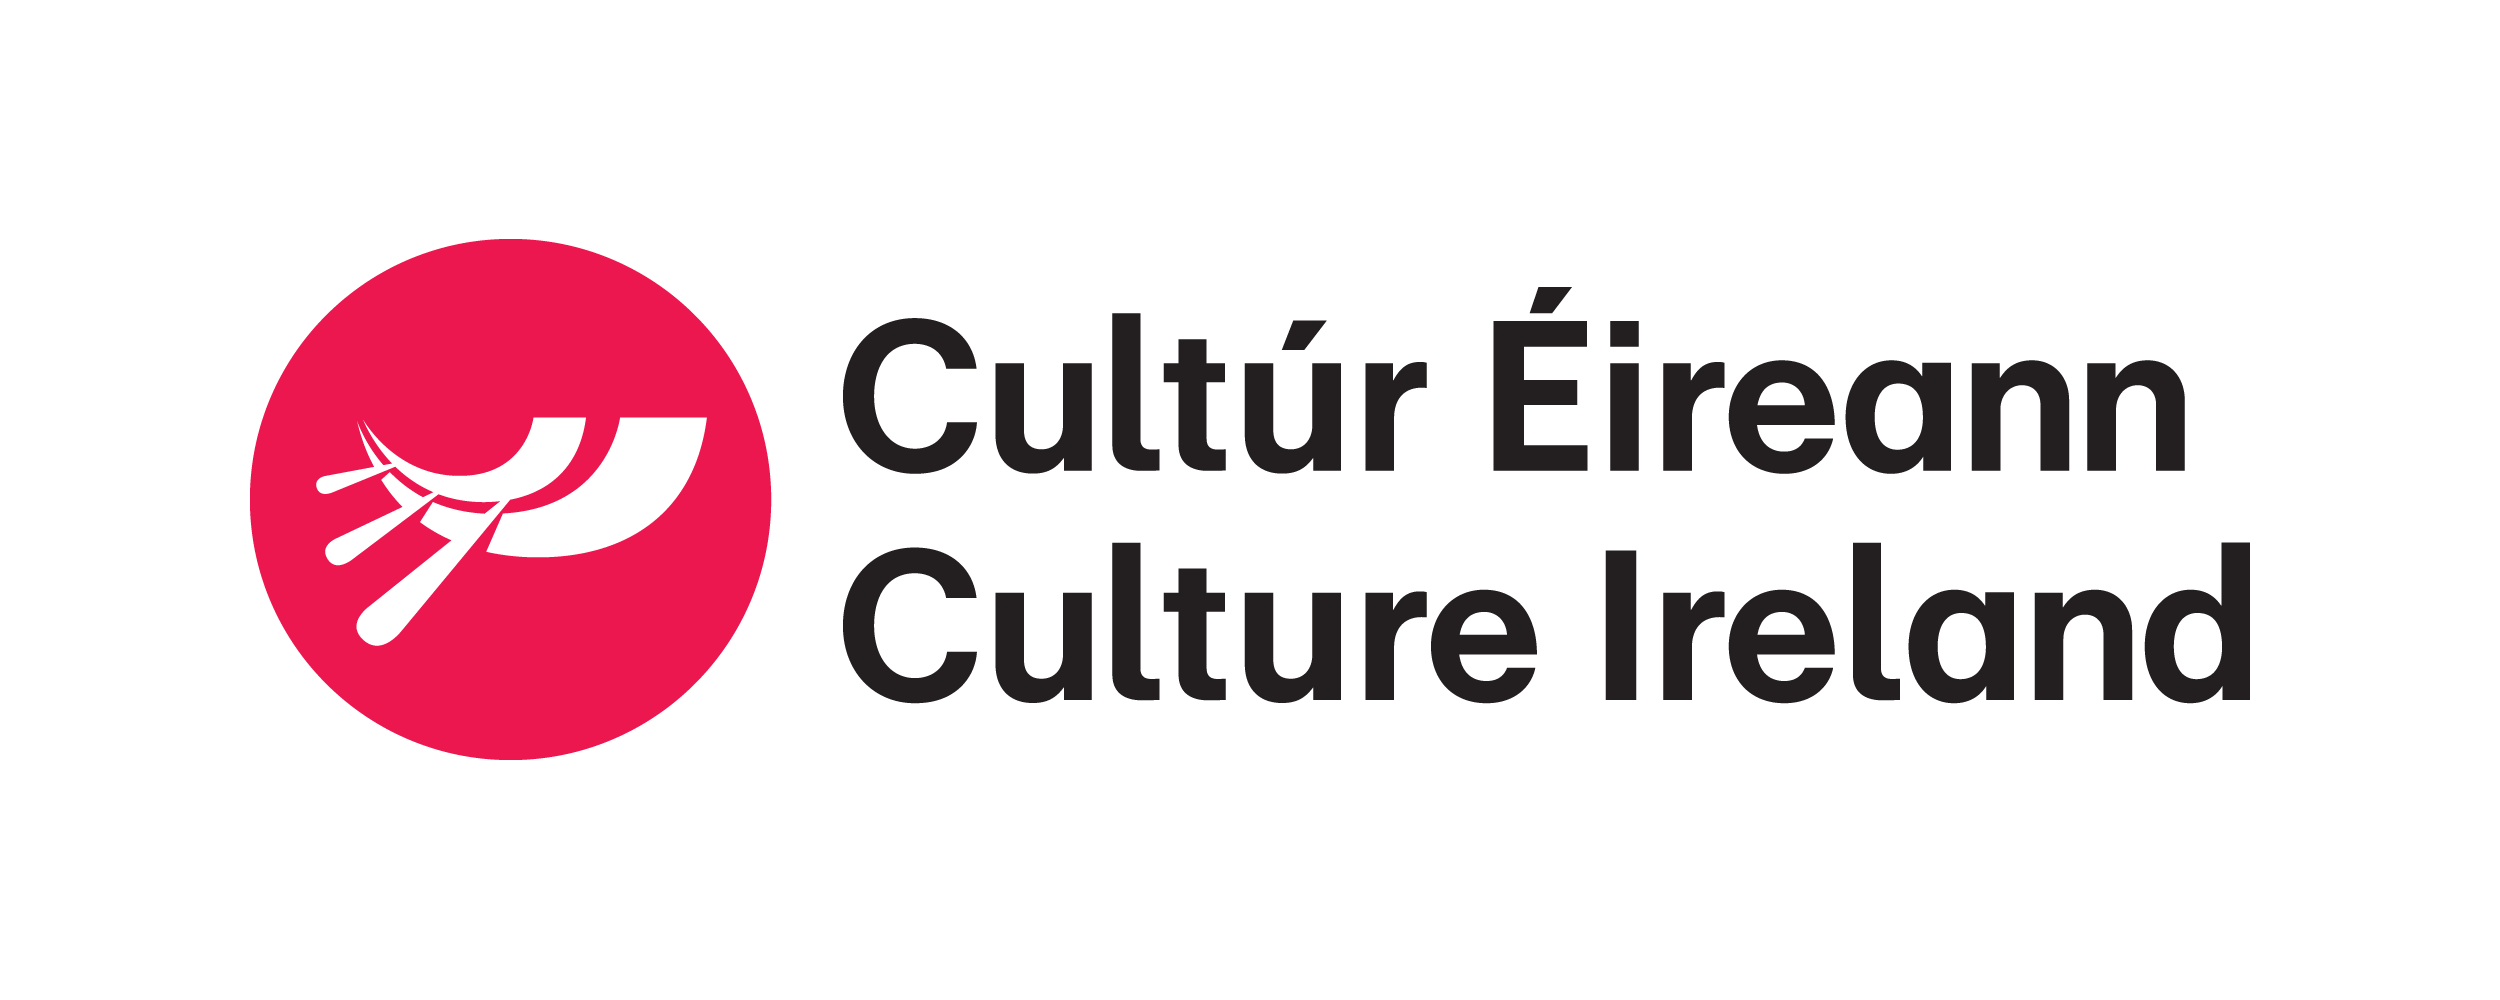 Logo of a hot pink circle with white symbol next to text: Cultúr Éireann / Culture Ireland